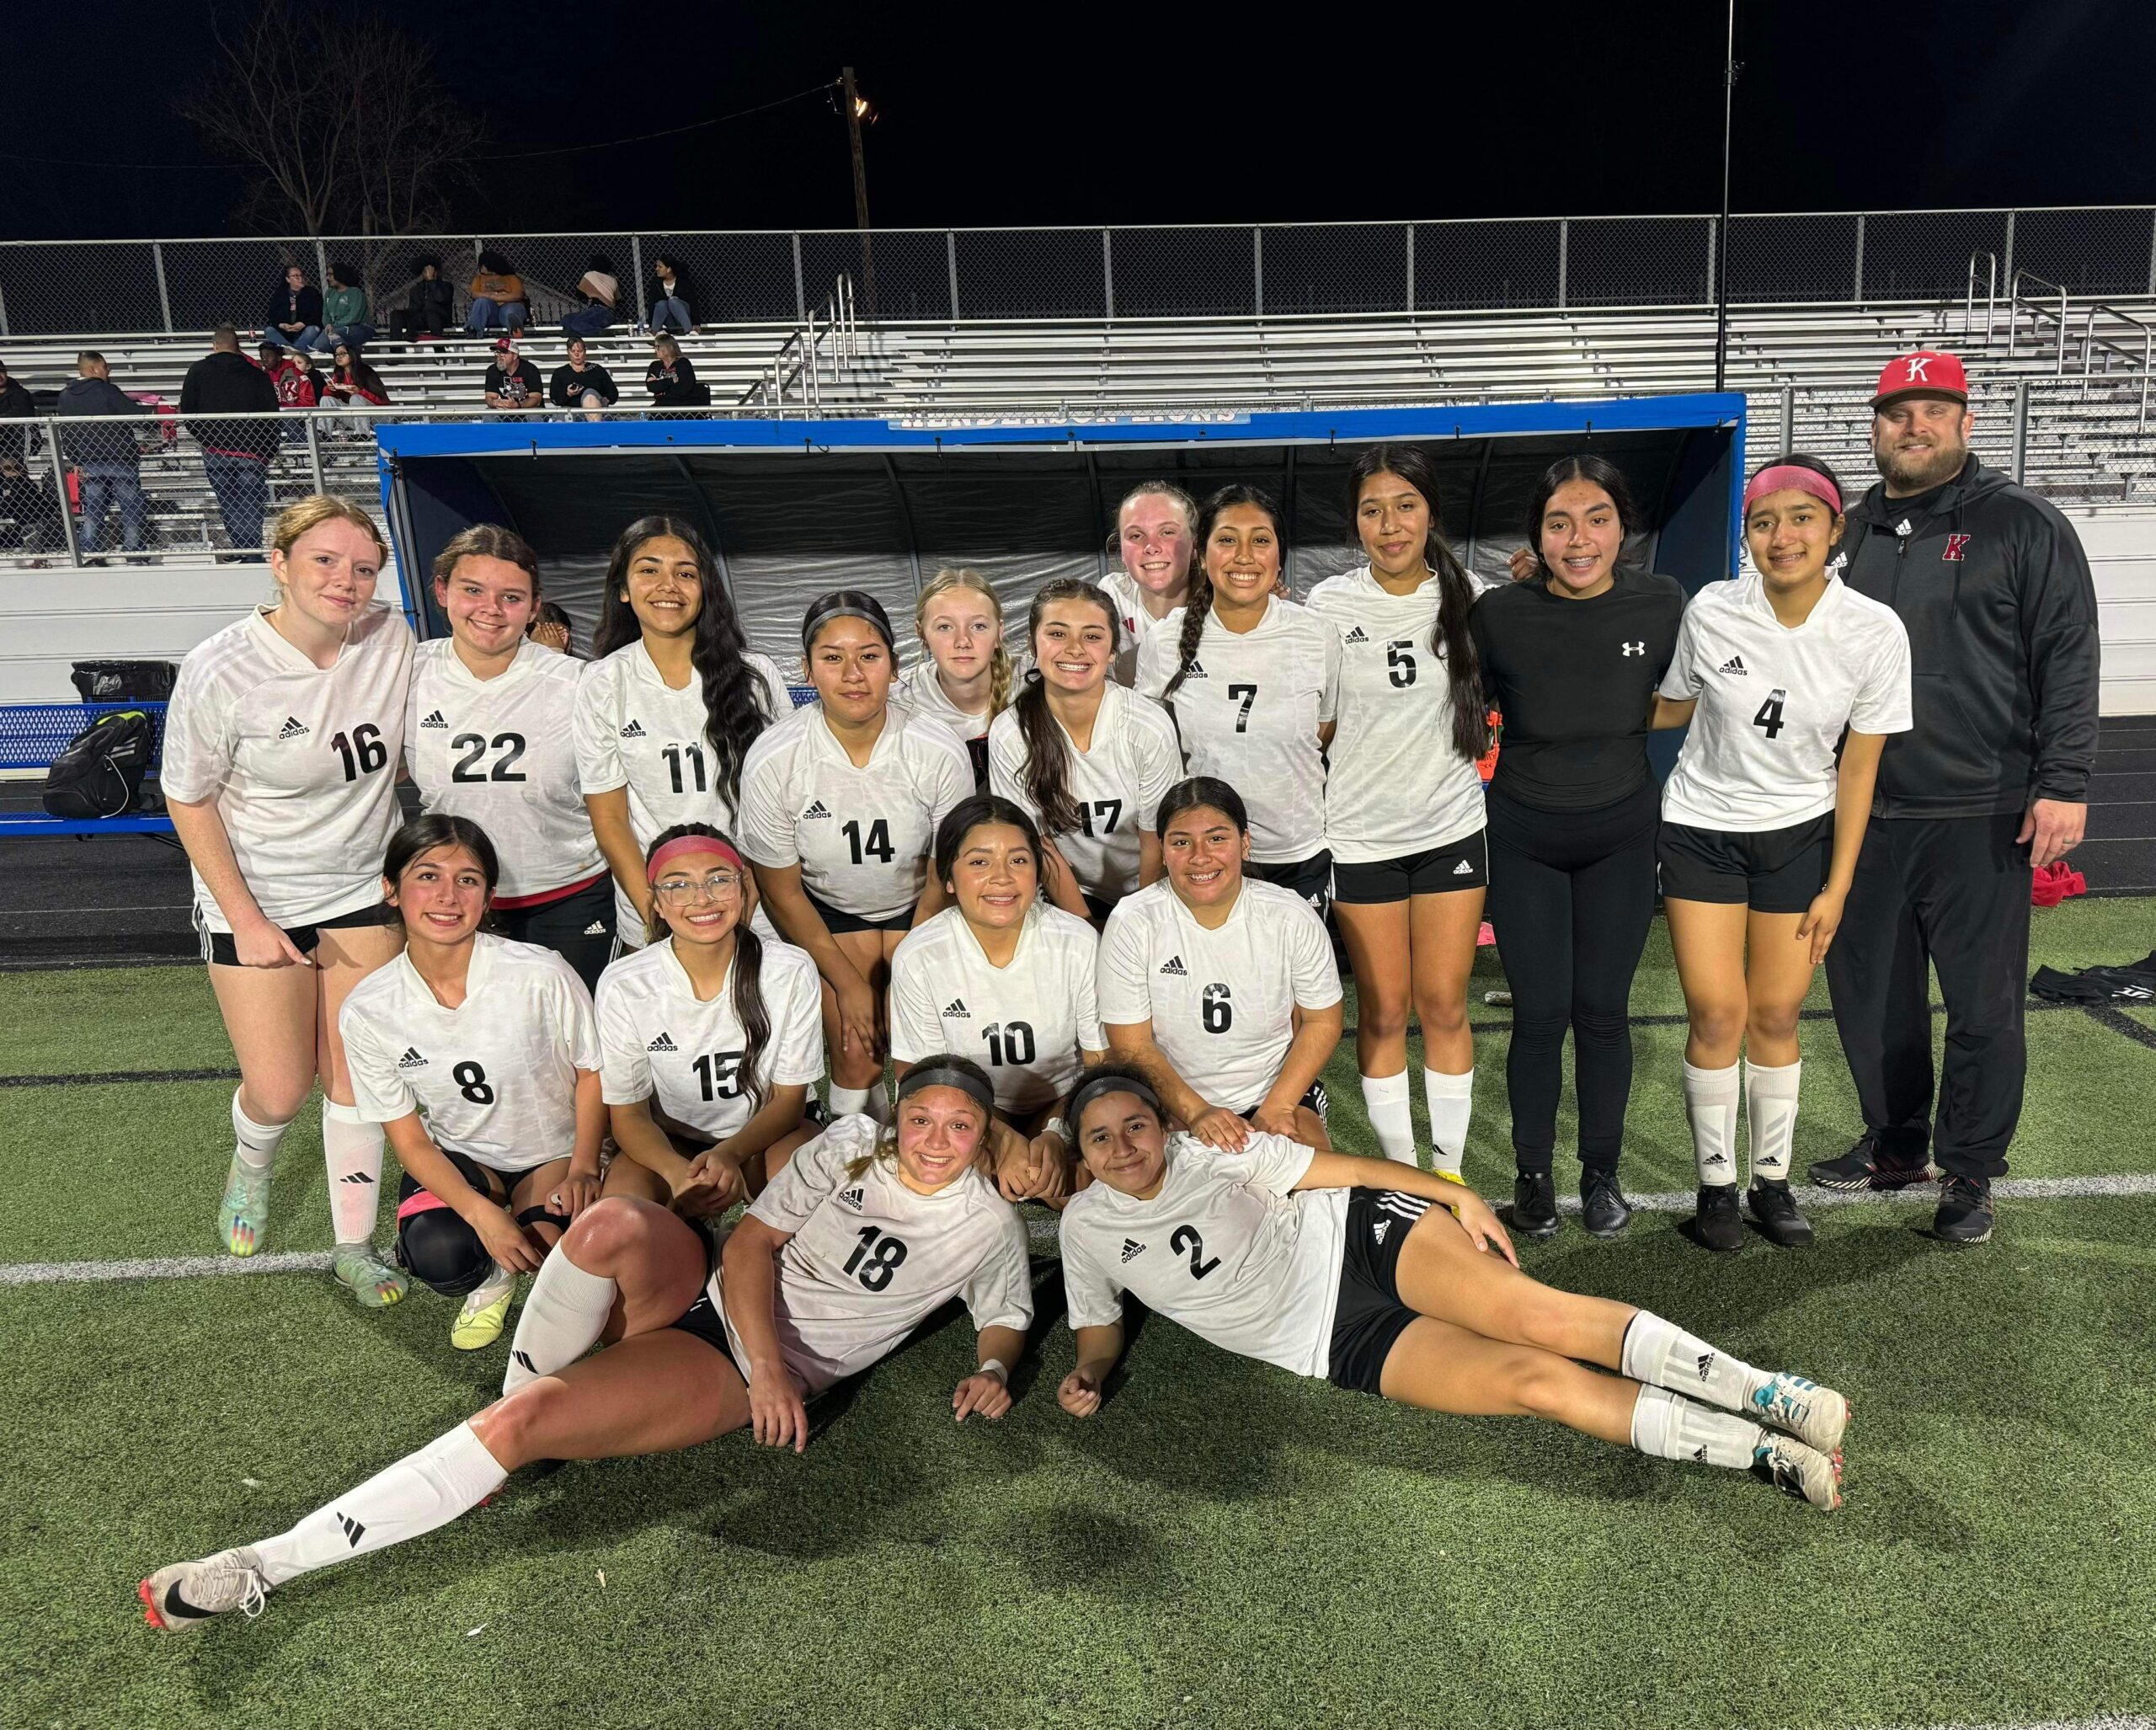 Kilgore's girls JV team; the girls are 8-0, and have outscored their opponents 47-0 this season. (Photo courtesy of KILGORE HIGH SCHOOL SOCCER COACH JASON BRAGG)